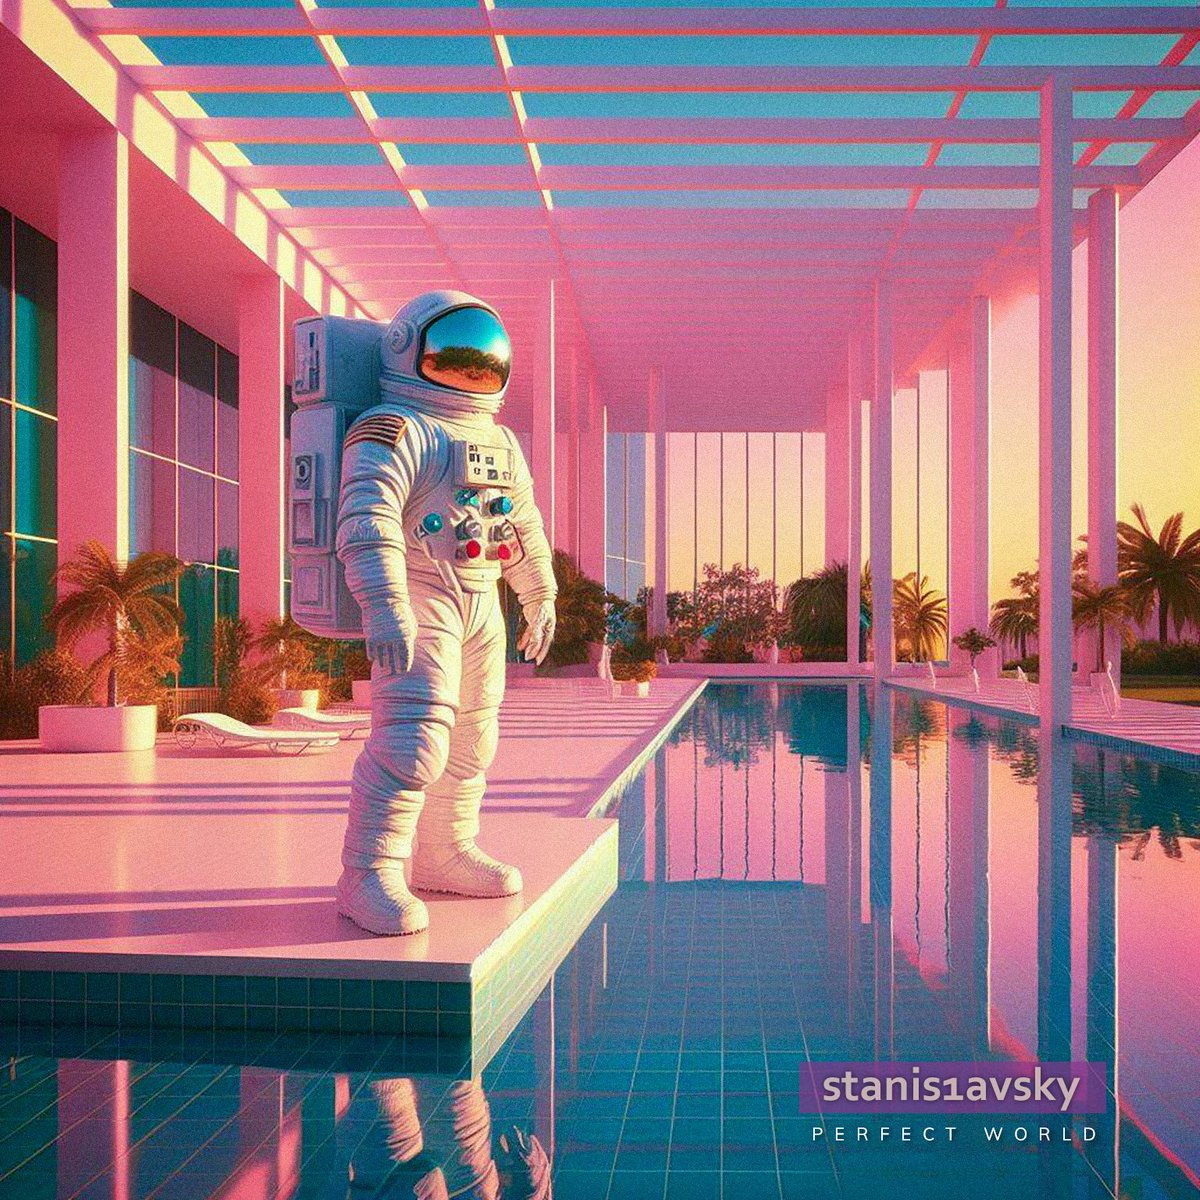 #stanis1avsky #newwave #synthpop #synthwave #artpop #neofuturism                                                                   

The sun always shines in an ideal world